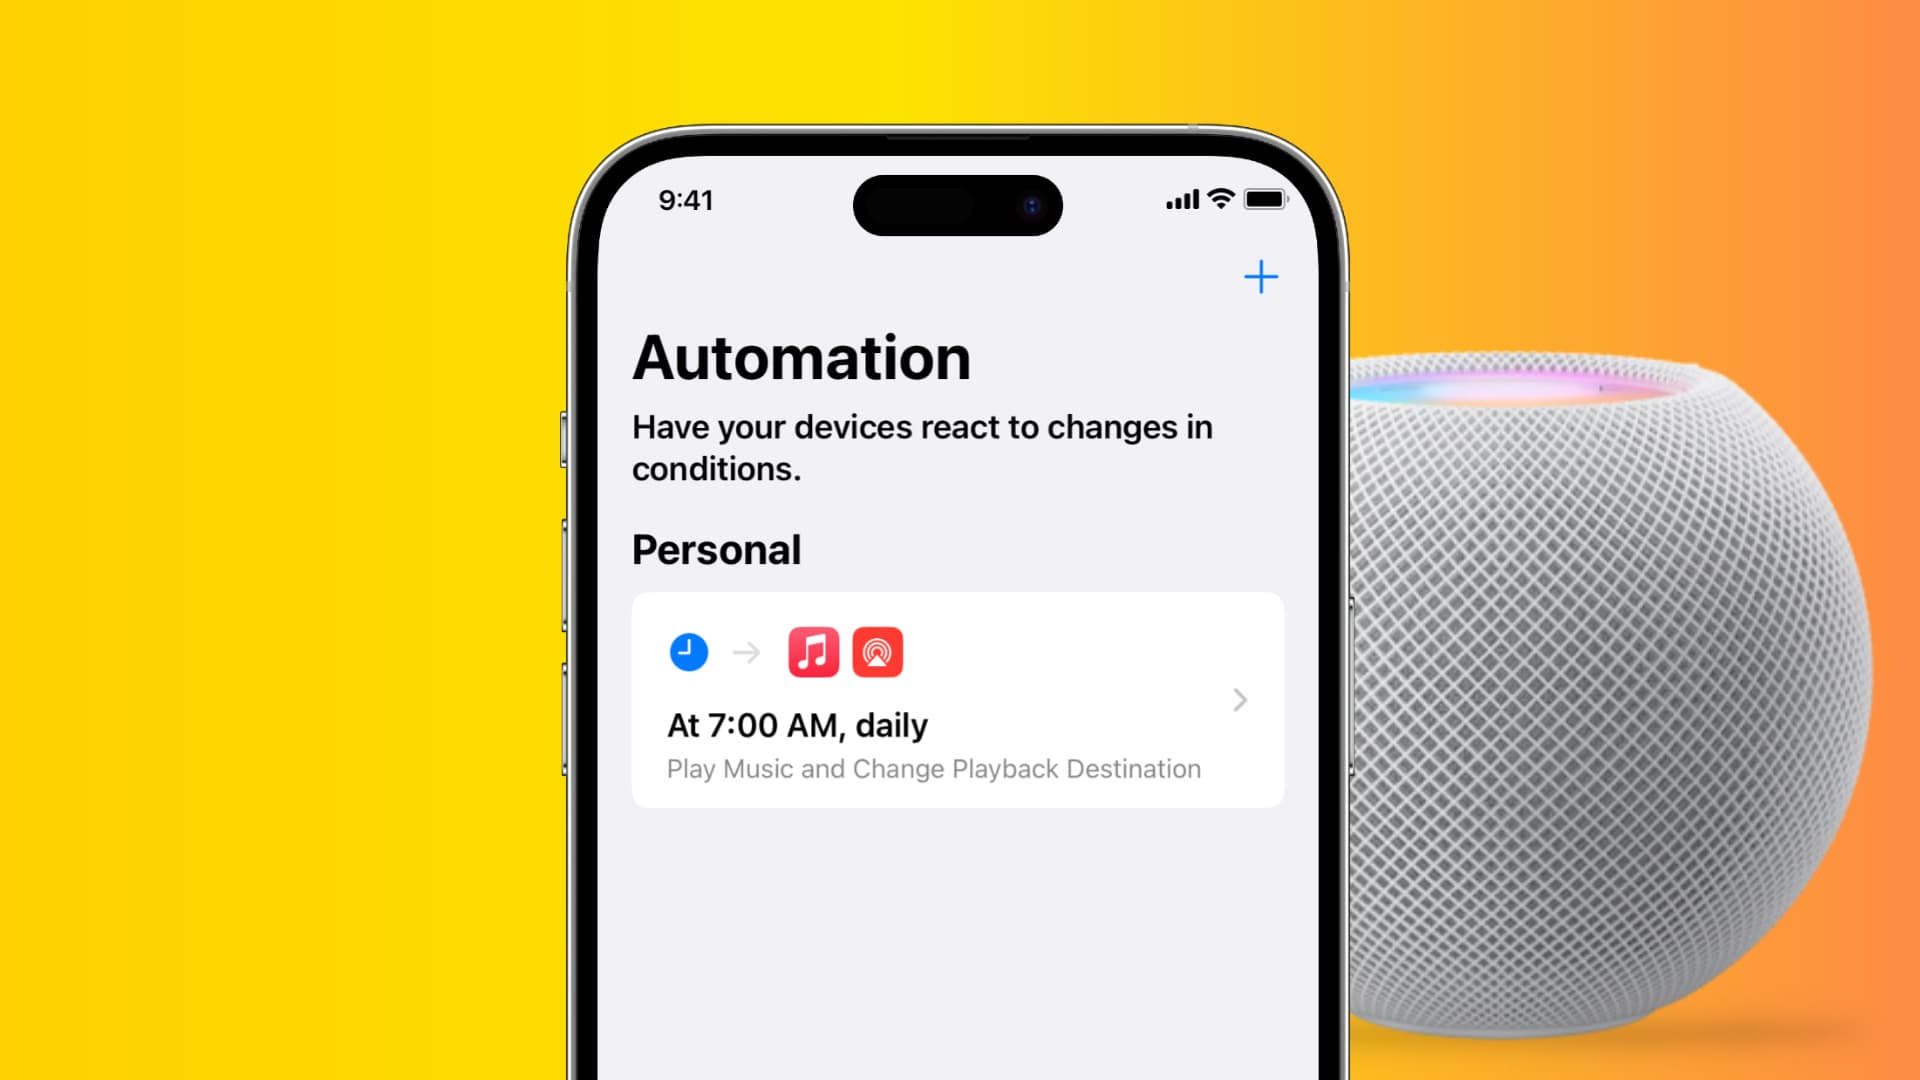 Automation to play music on HomePod